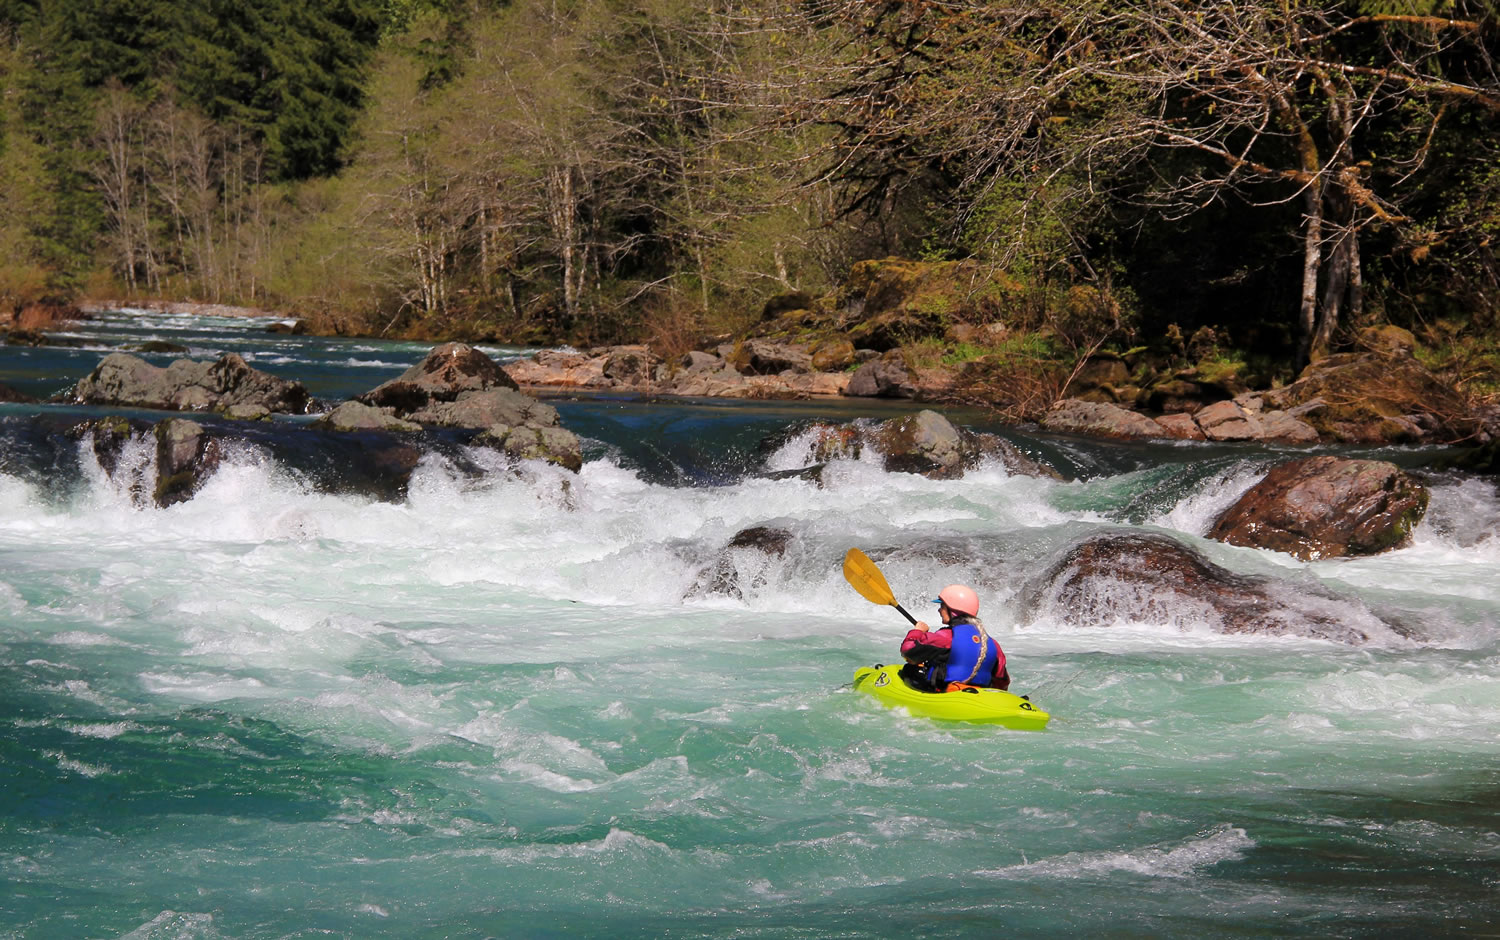 Laurie Pavey of Corvallis, Ore., paddles in the water below Bullseye rapid on the North Fork of the Middle Fork Willamette River, near Westfir, Ore., on April 13.